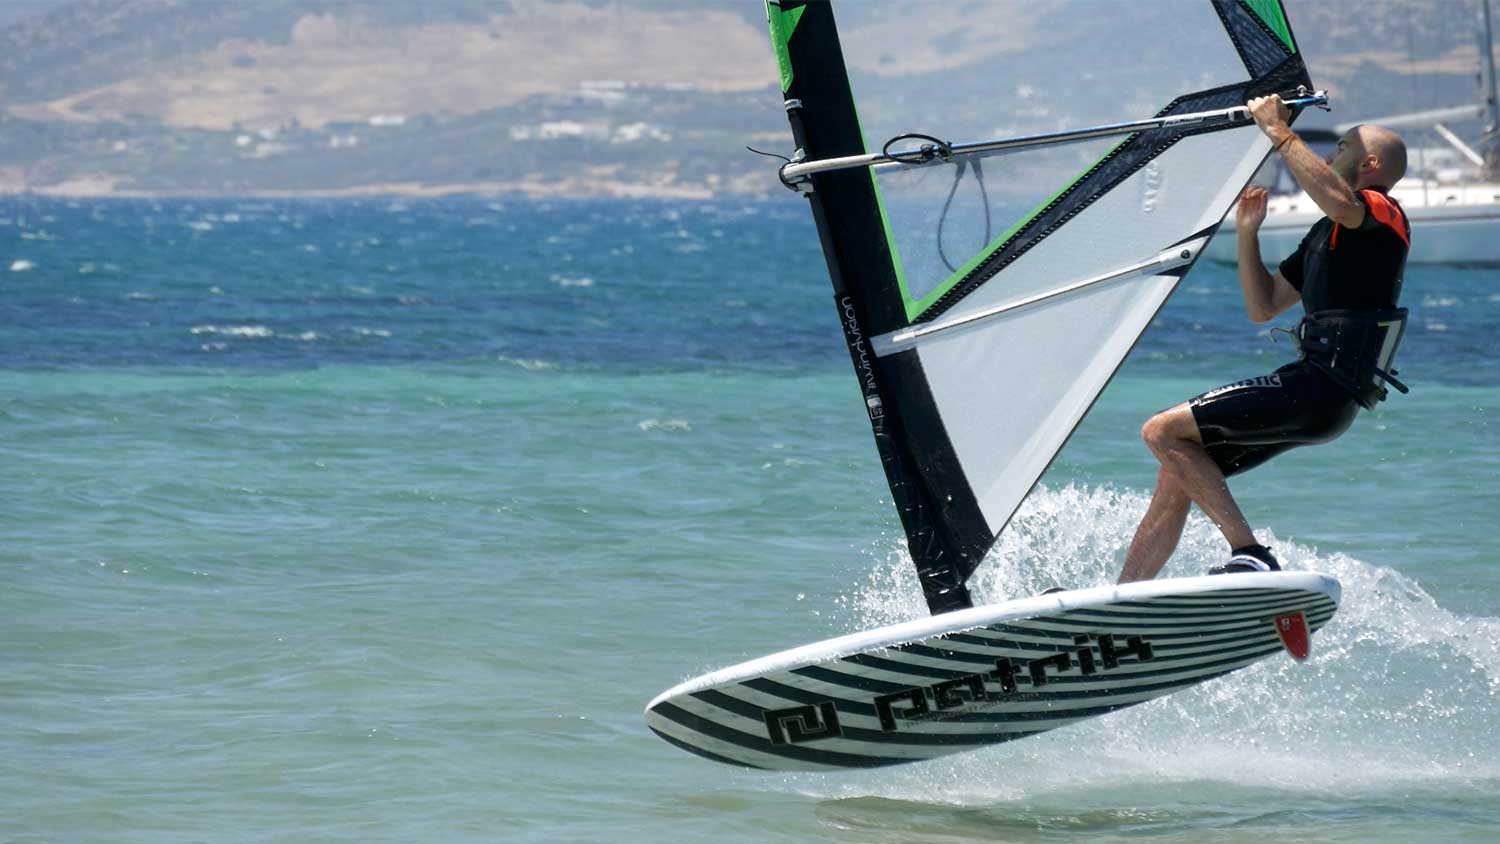 Switch Chacho by French freestyle windsurfer Pierre Garambois